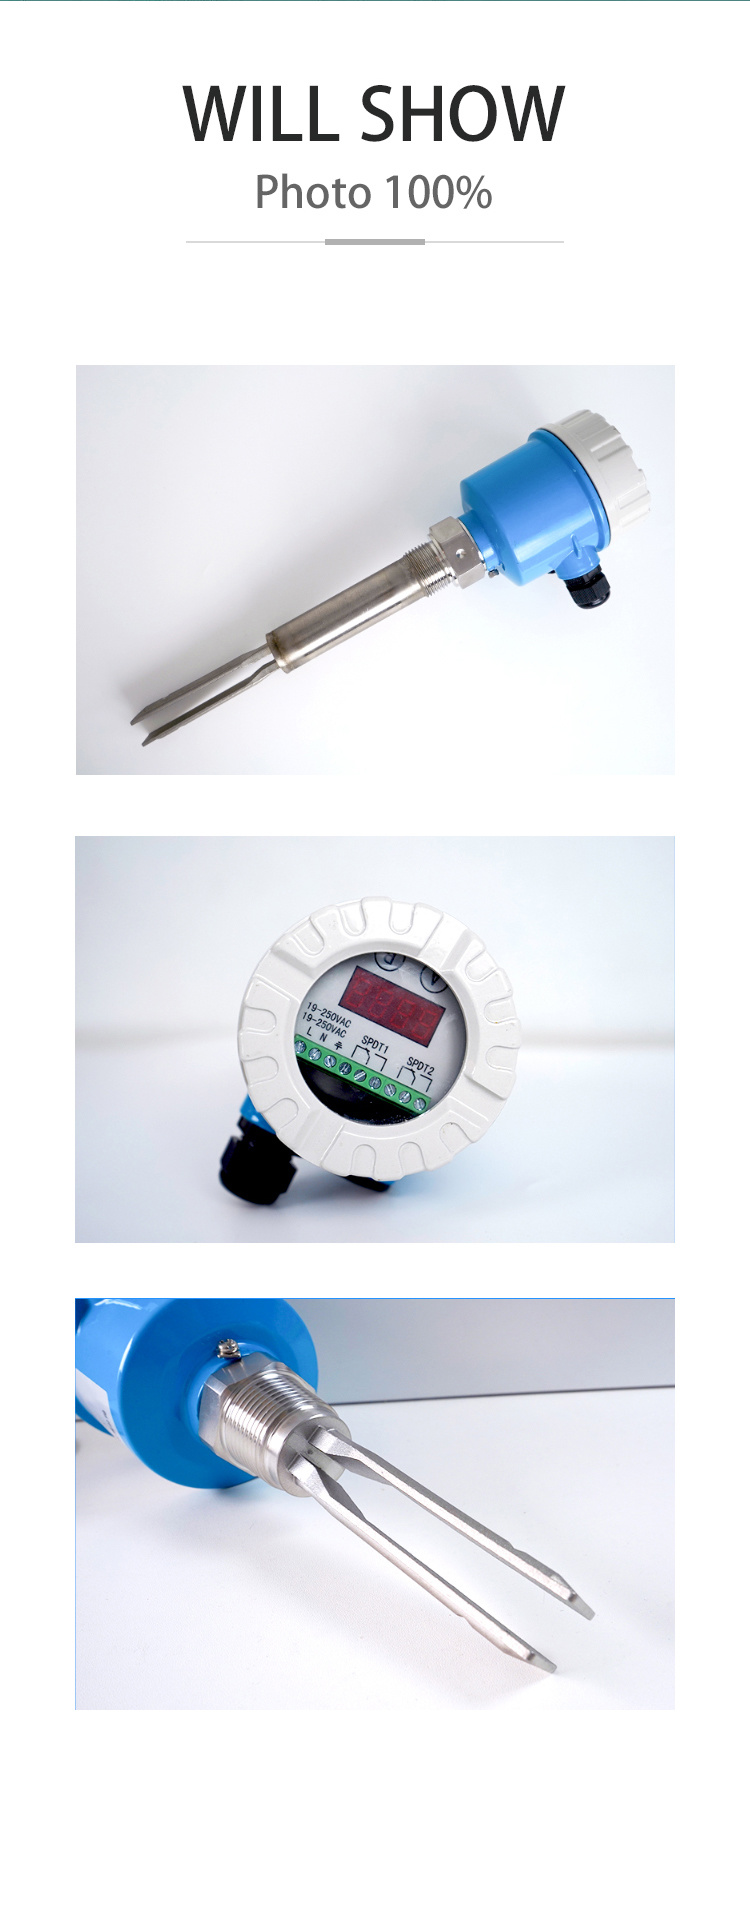 Flange Type 100mm High Temperature Vibrating Tuning Fork Level Switch Made in China